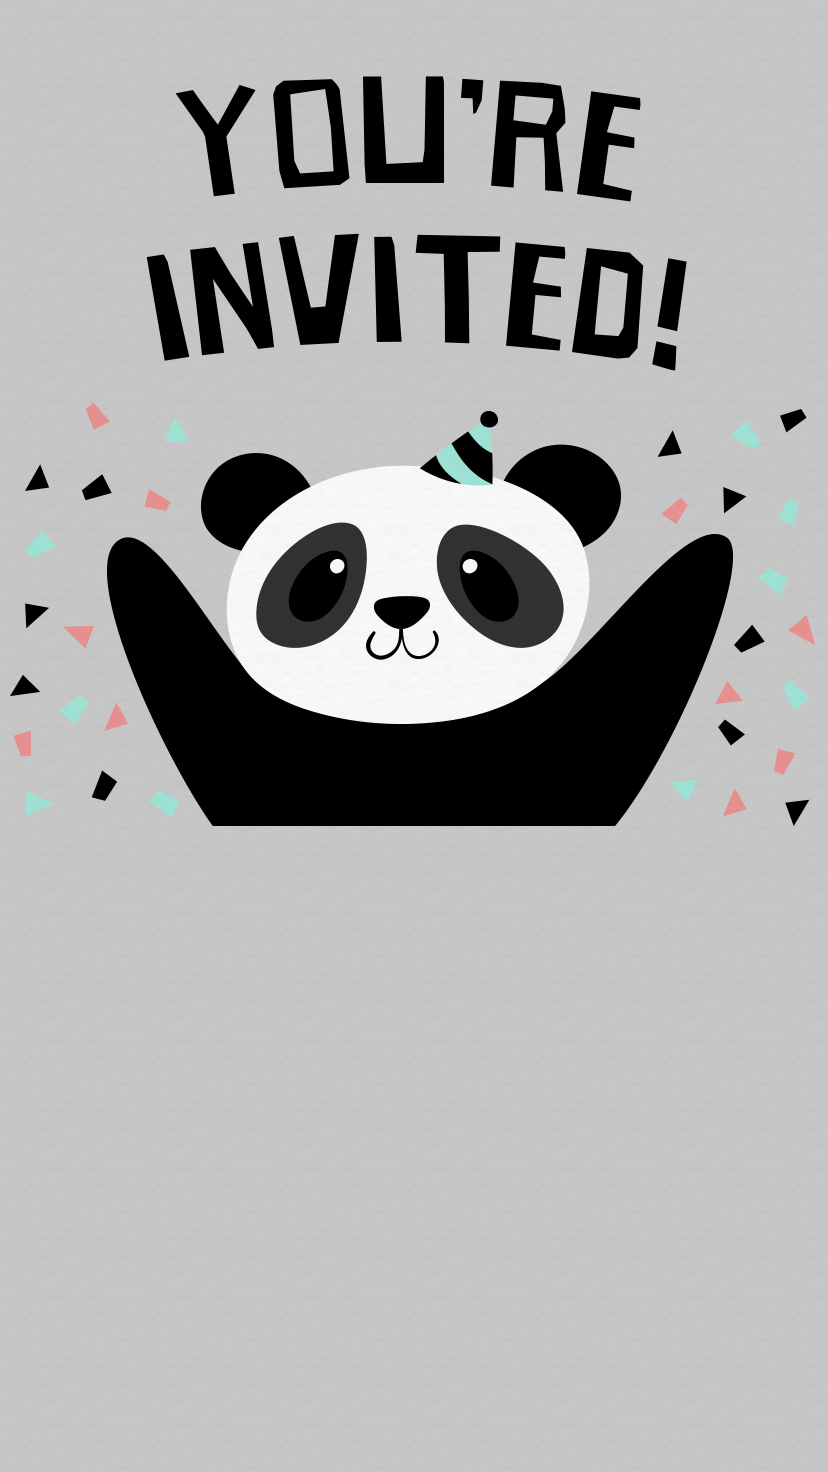 panda bear animated evite invitation birthday party invitations themed funny pictures with captions small